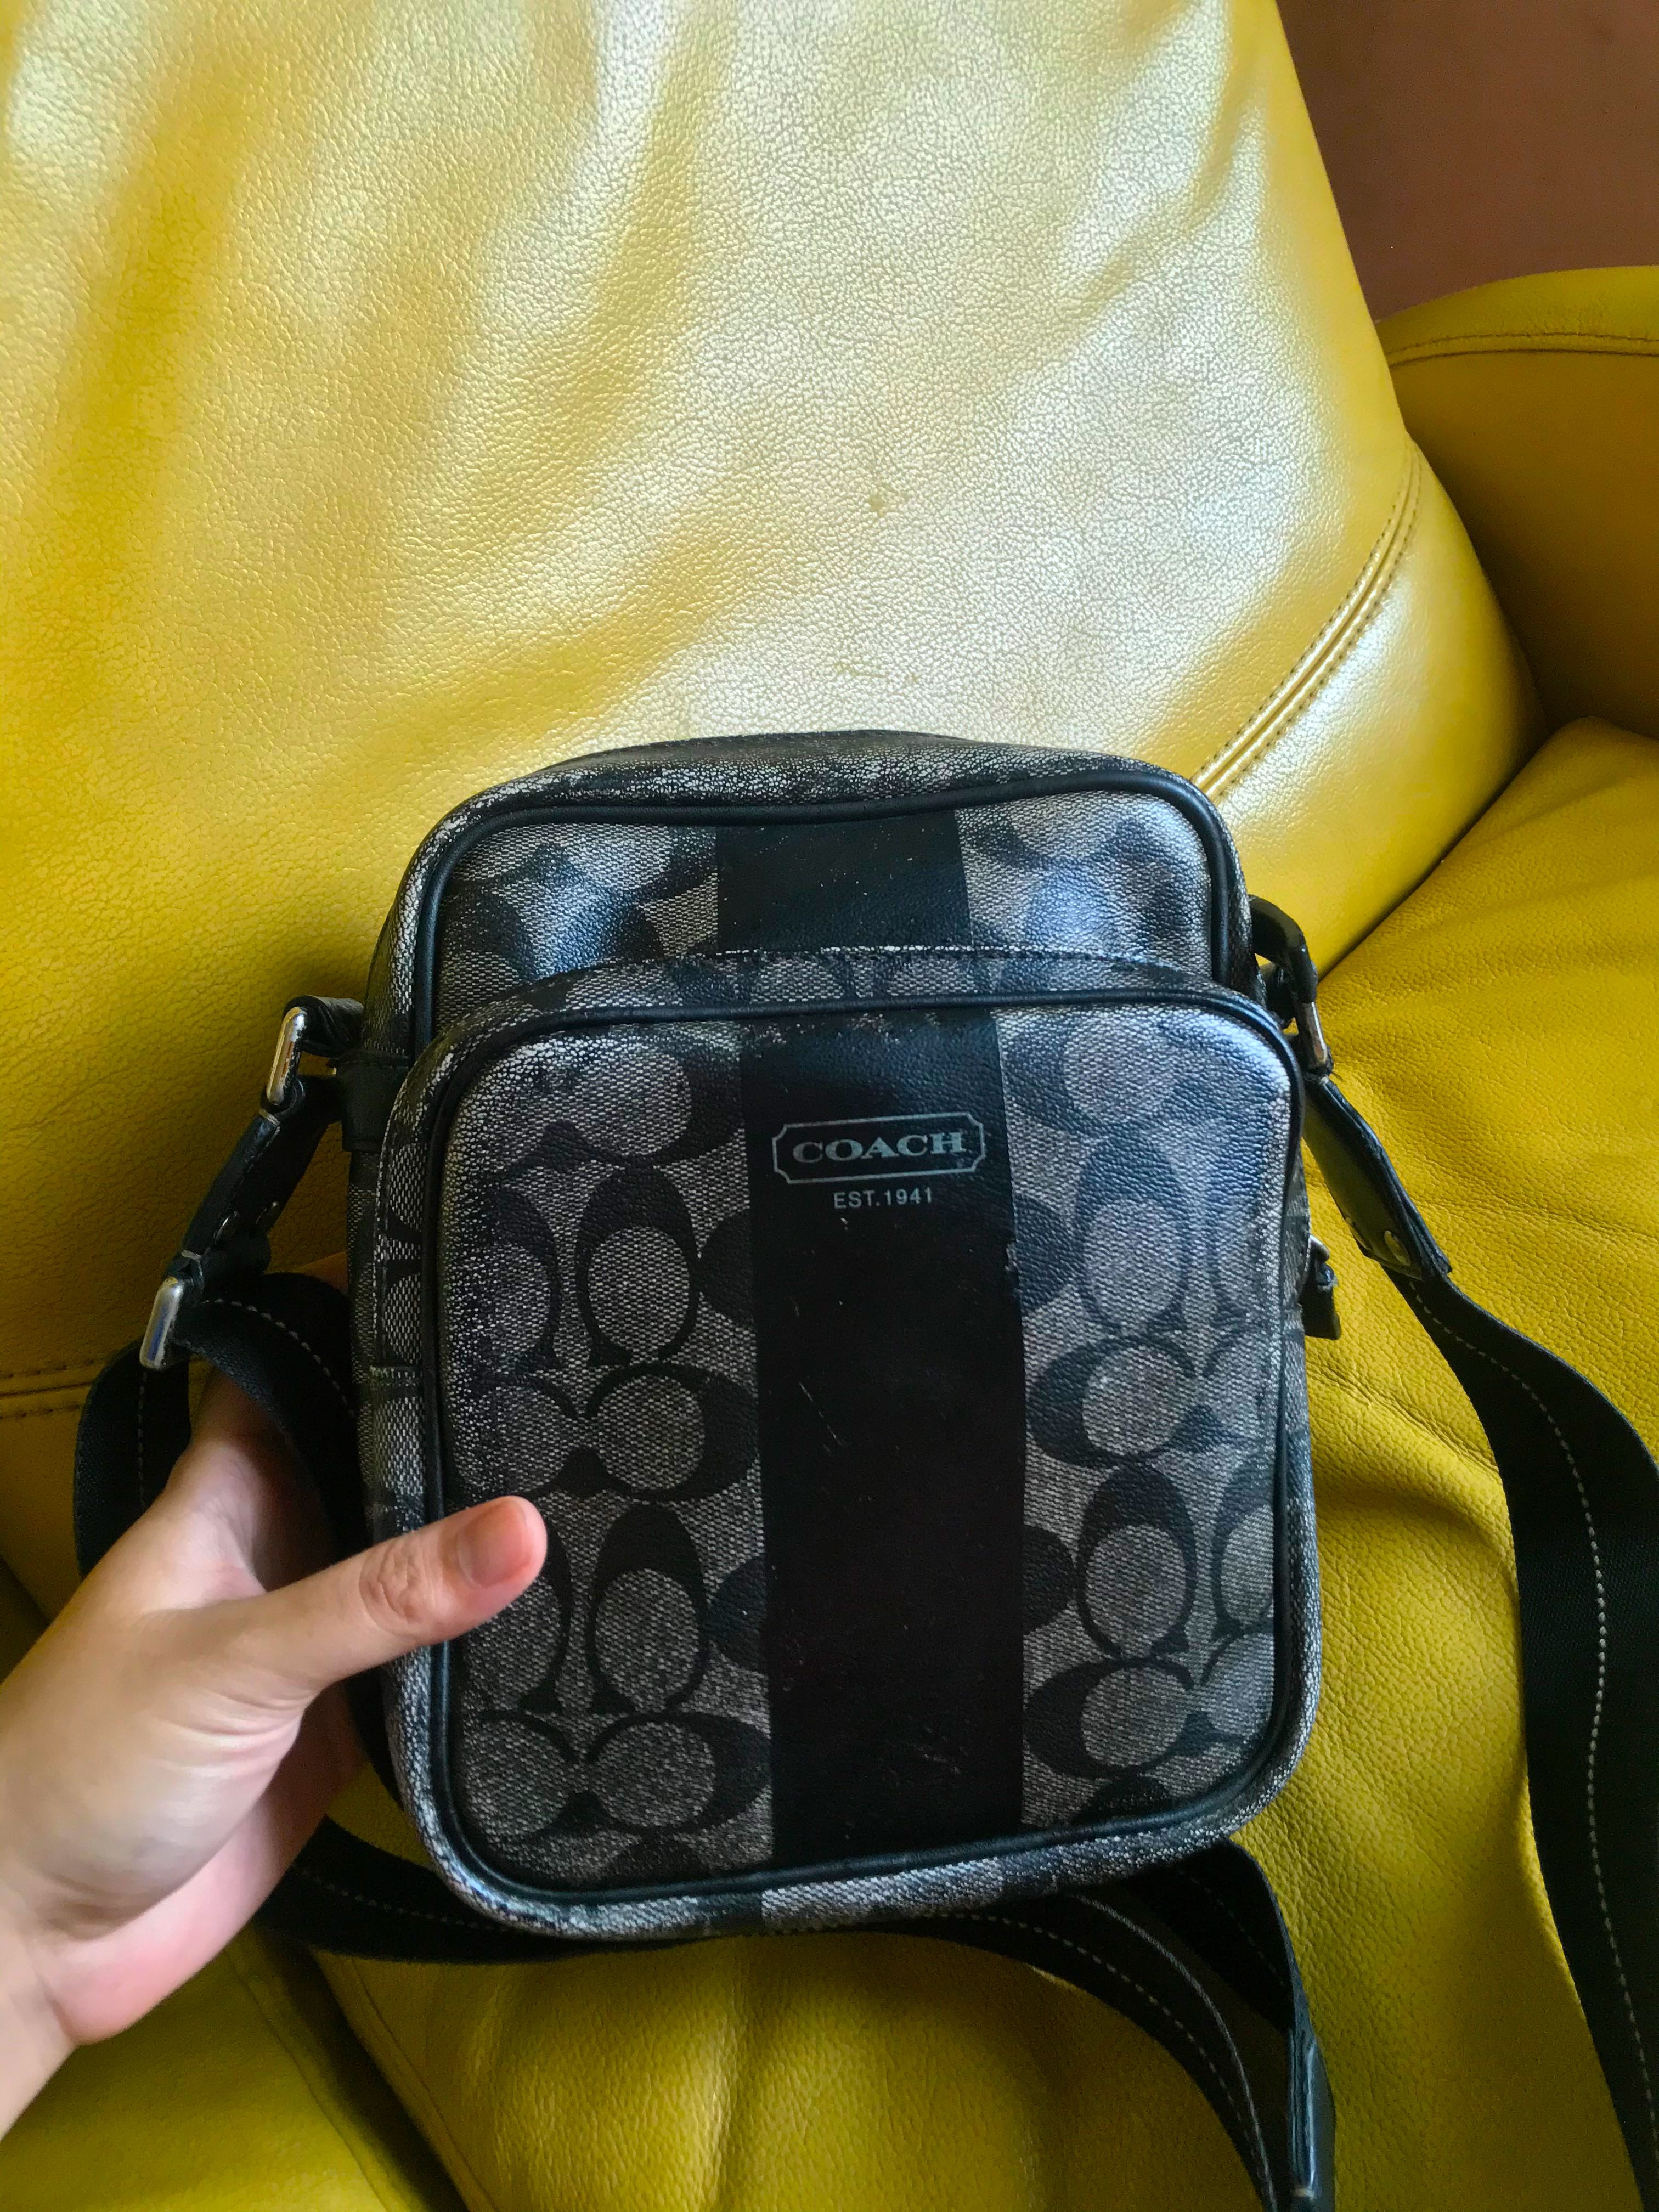 Coach Sling Bag amazon, Men's Fashion, Bags, Sling Bags on Carousell